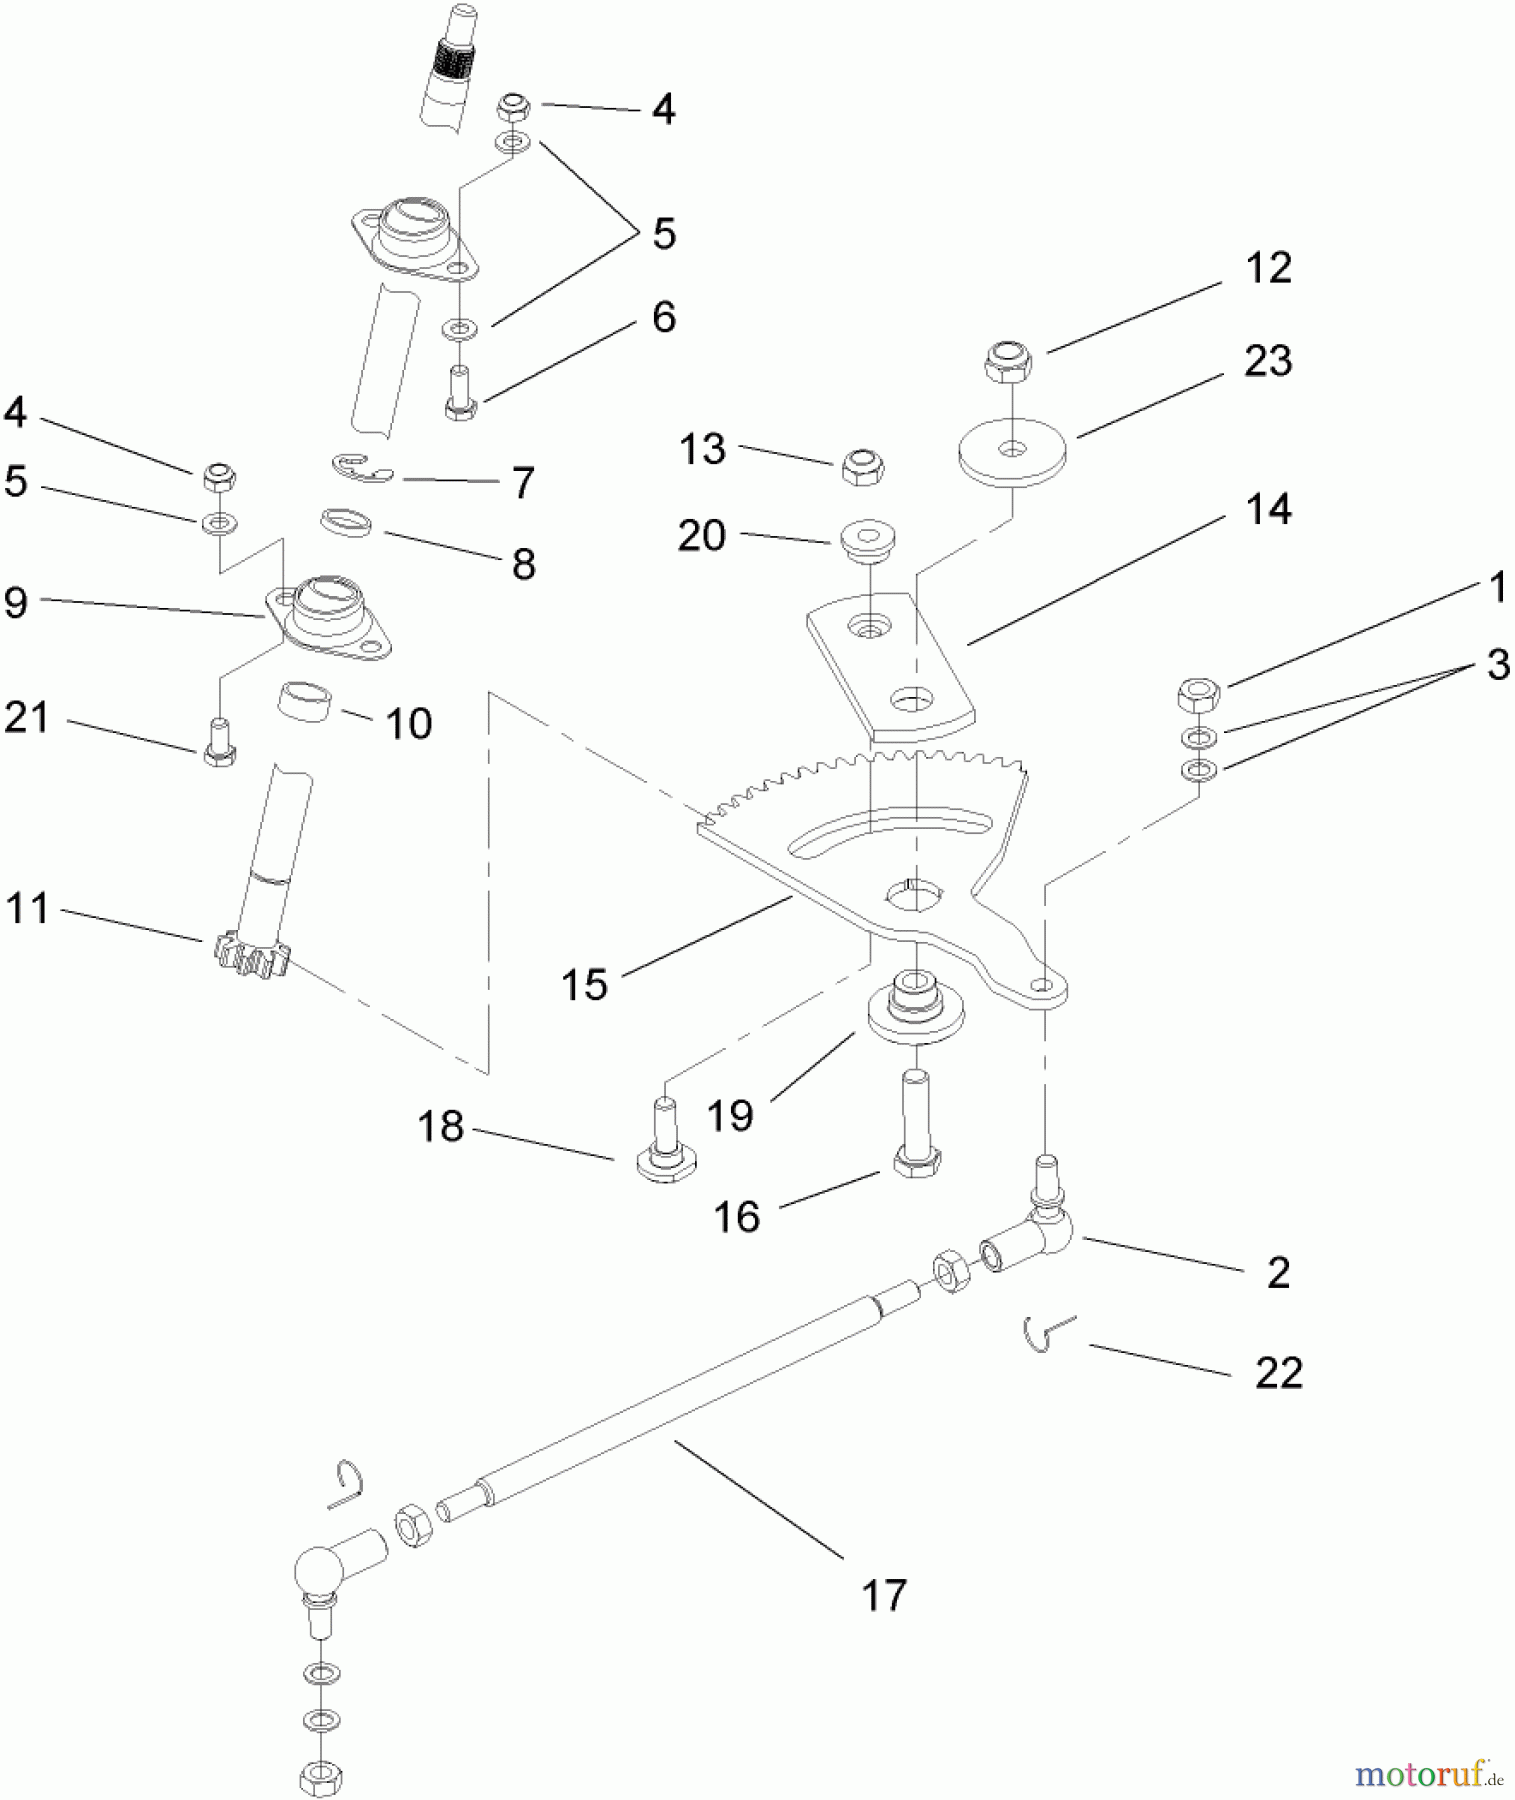  Toro Neu Mowers, Lawn & Garden Tractor Seite 1 74582 (DH 210) - Toro DH 210 Lawn Tractor, 2007 (270000001-270999999) STEERING ASSEMBLY